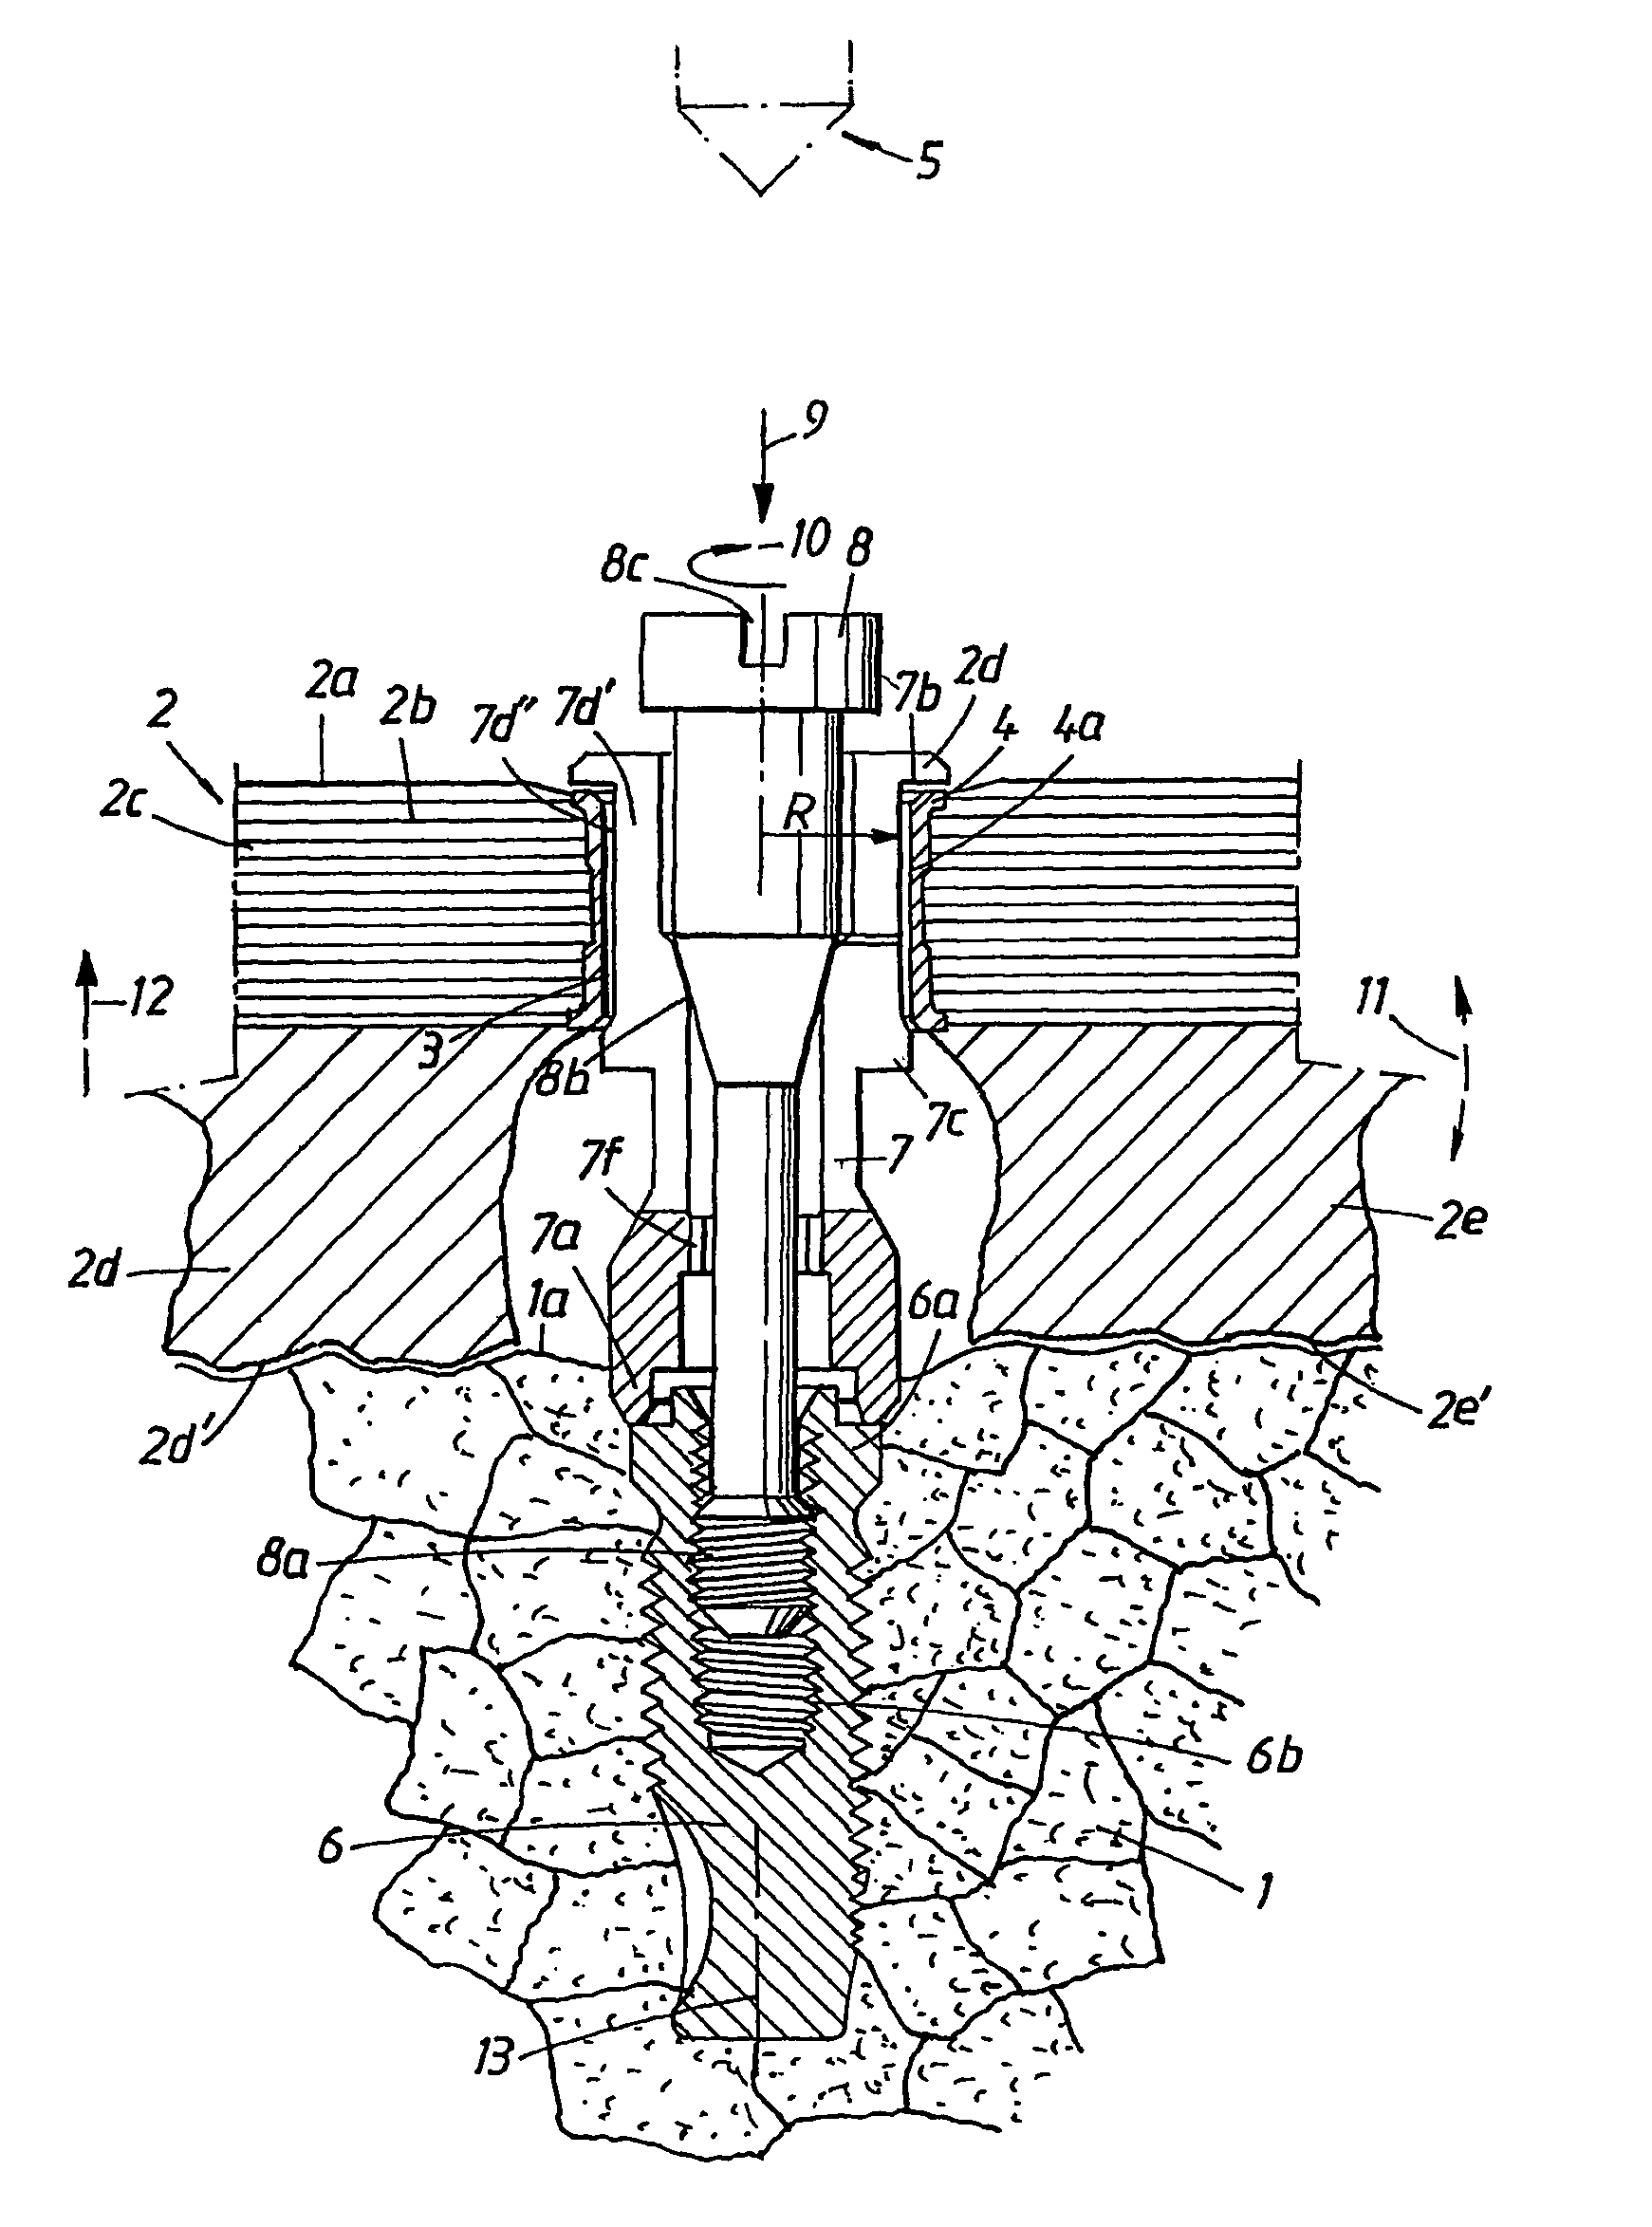 Device for determining position